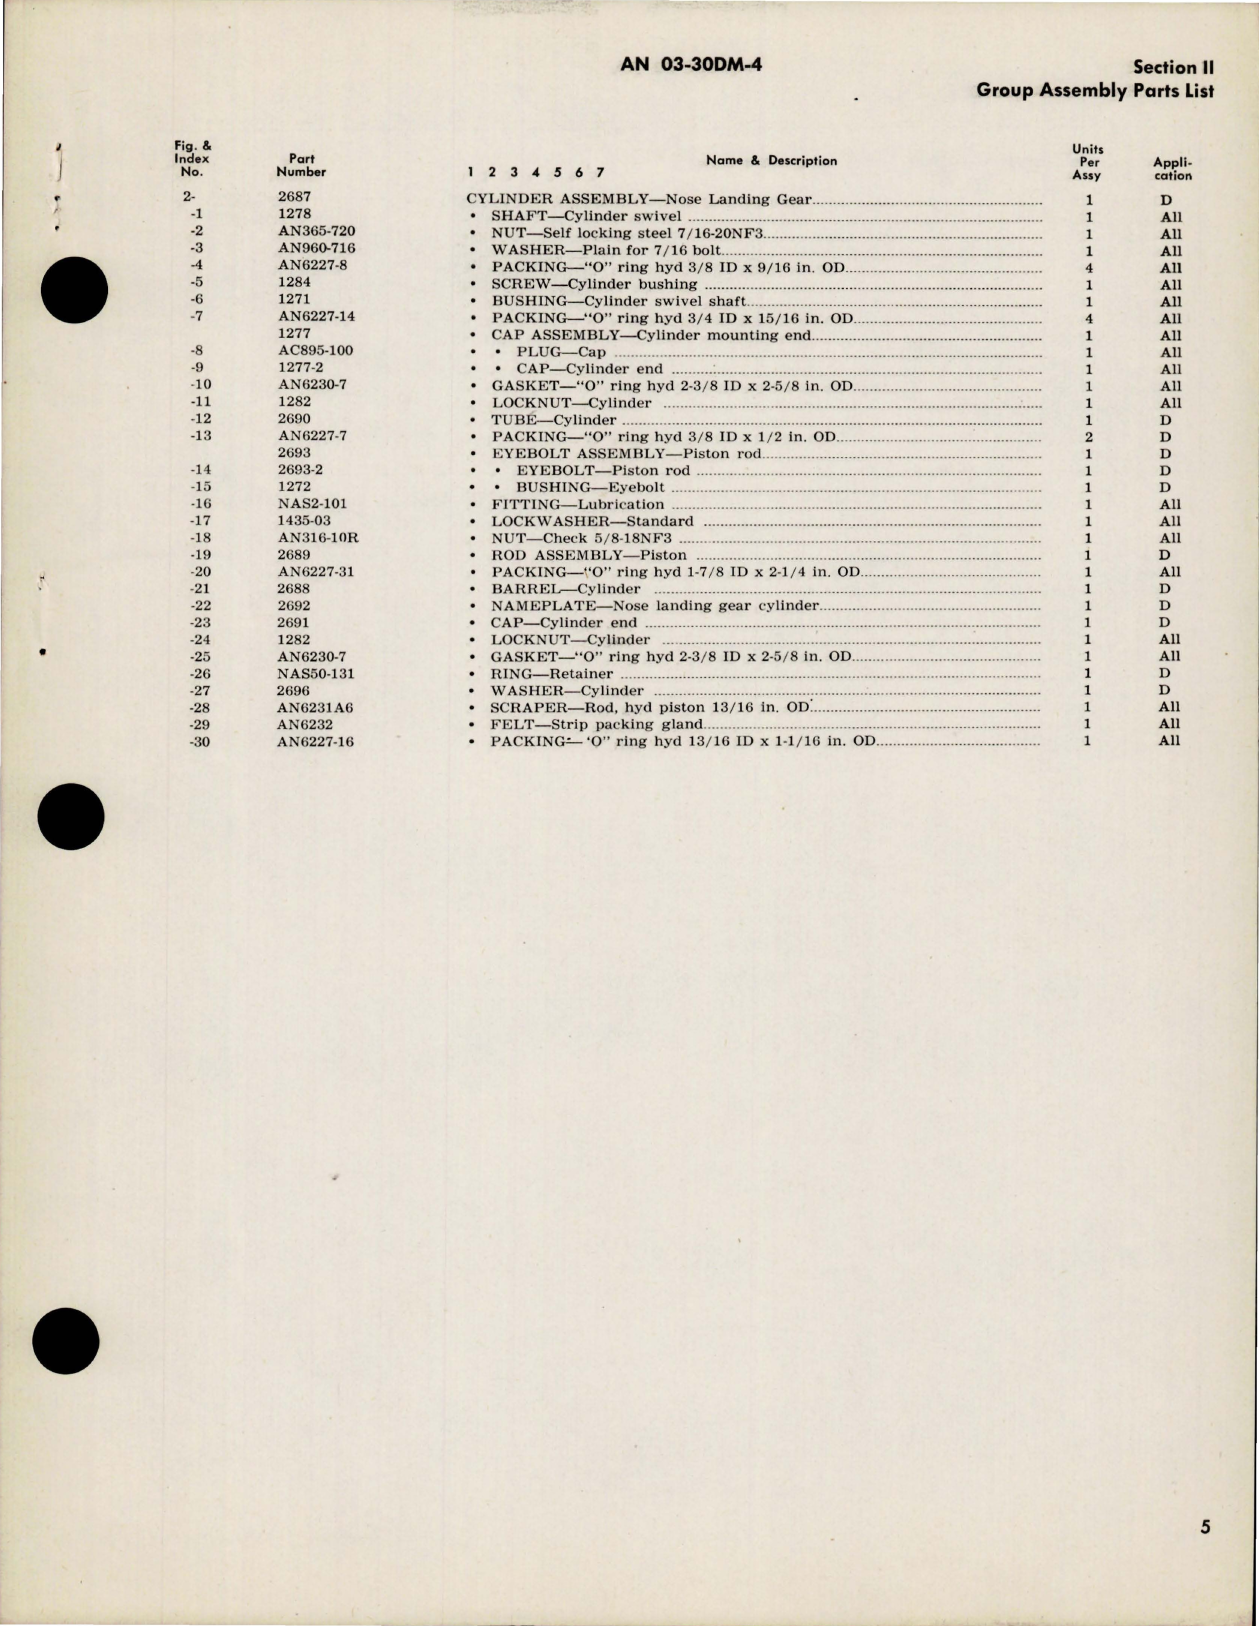 Sample page 5 from AirCorps Library document: Parts Catalog for Nose Landing Gear Cylinder 